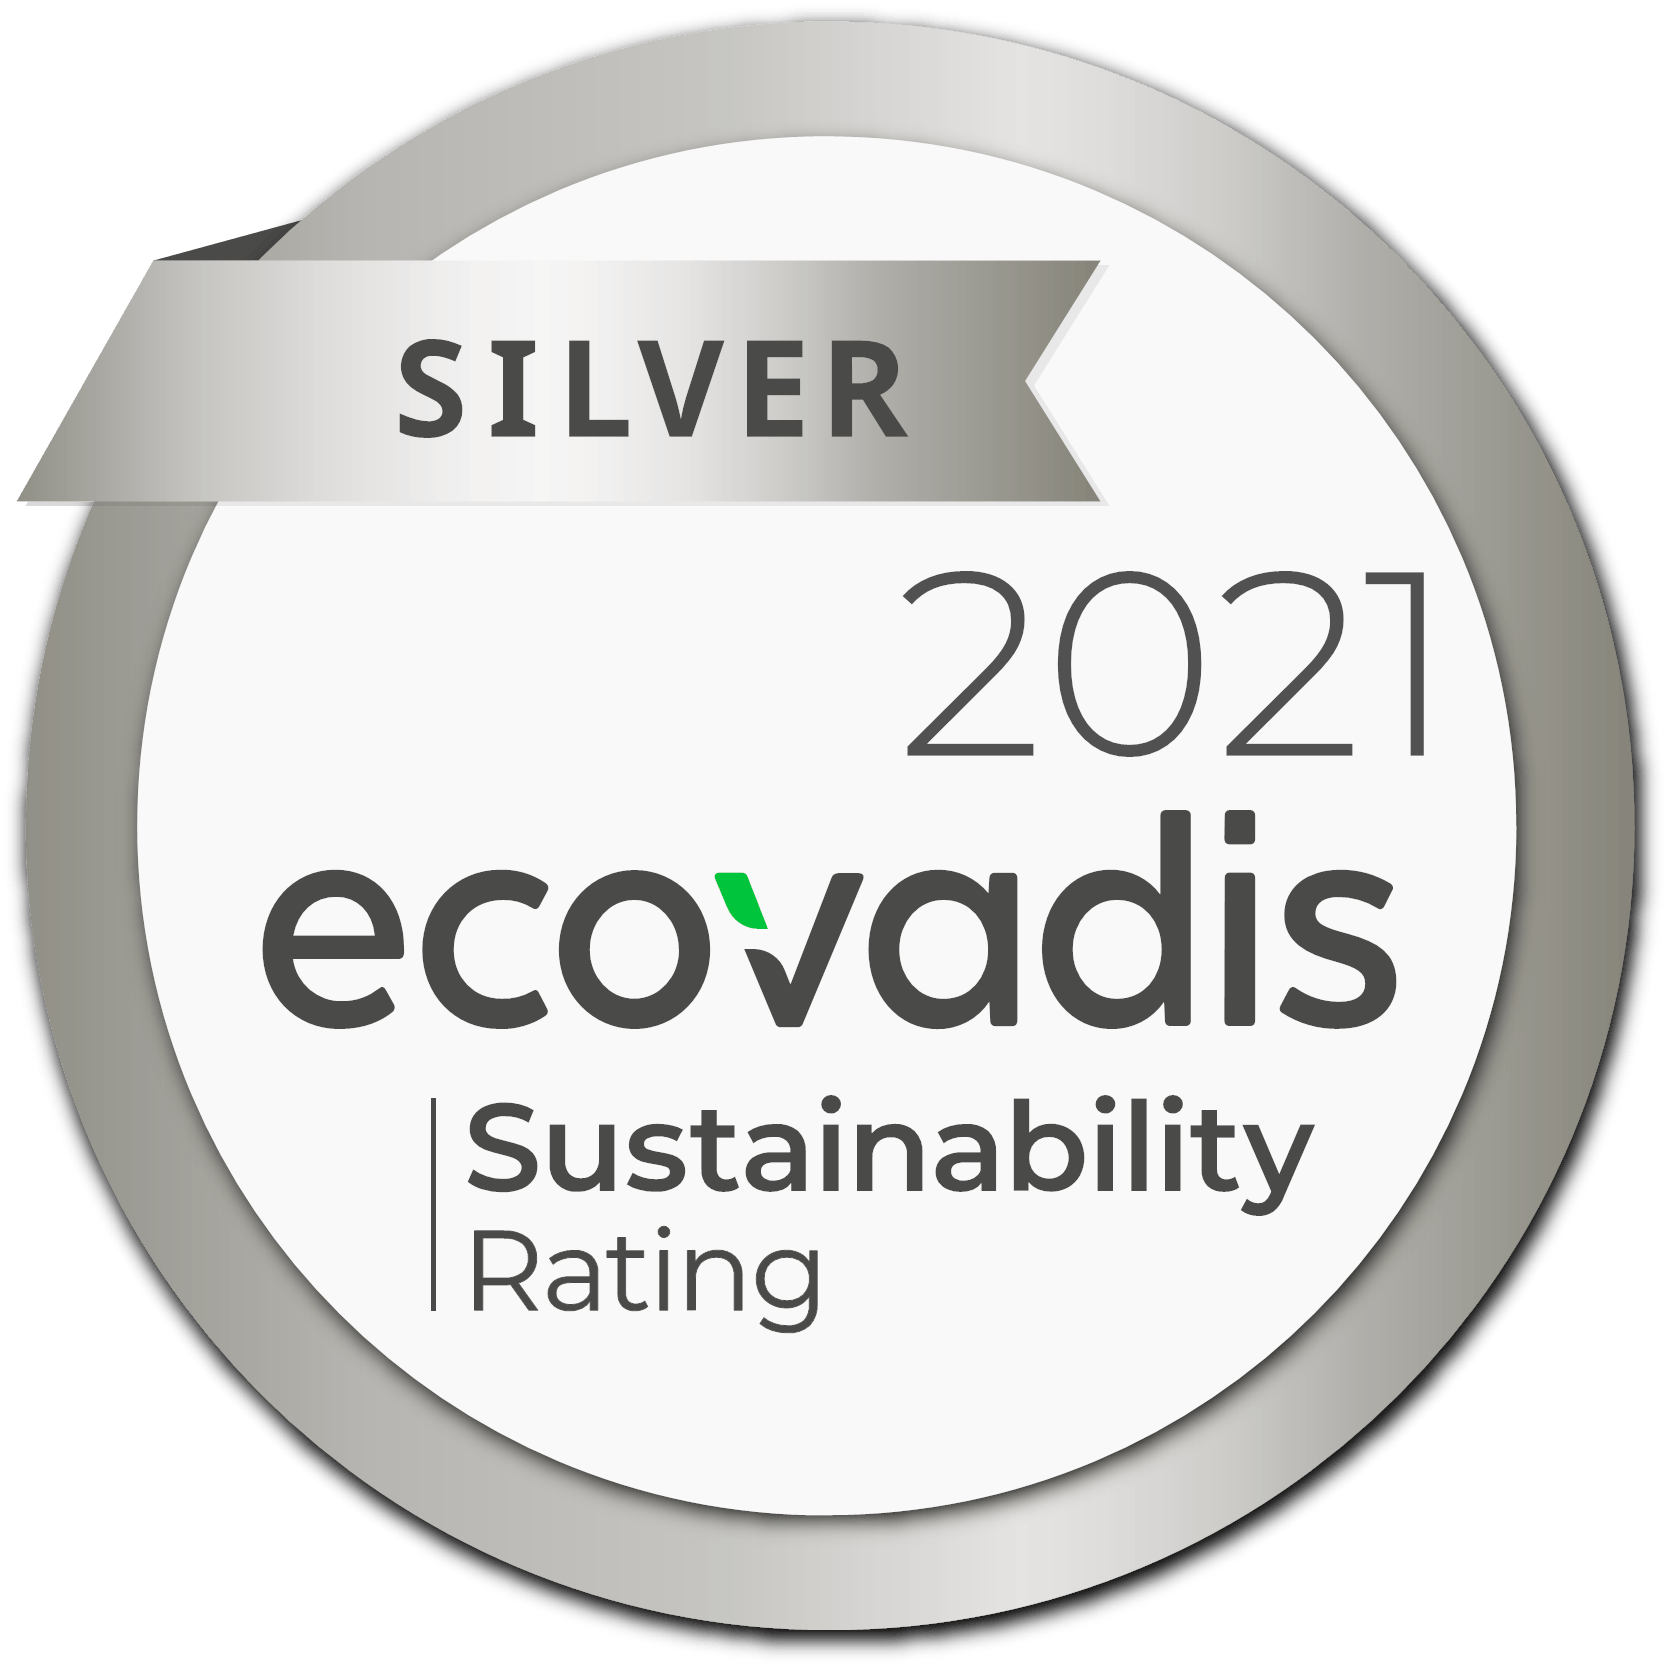 EcoVadis Silver 2021 Sustainability Rating